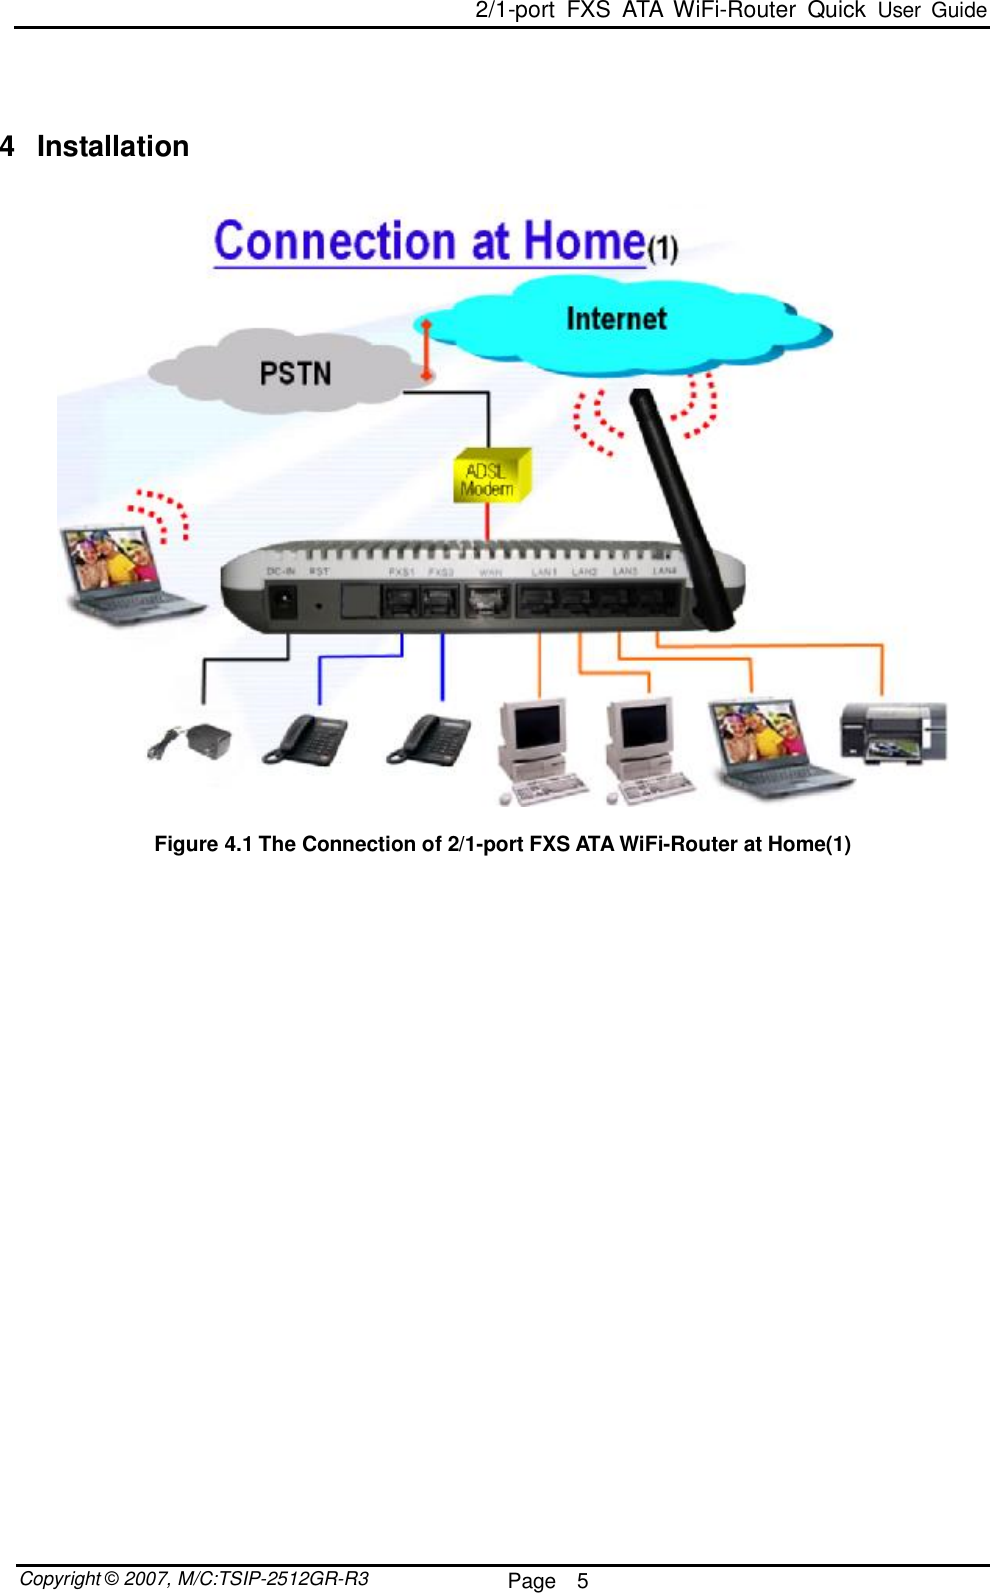  2/1-port FXS ATA WiFi-Router Quick User Guide  Copyright © 2007, M/C:TSIP-2512GR-R3  Page  5        4 Installation     Figure 4.1 The Connection of 2/1-port FXS ATA WiFi-Router at Home(1)   